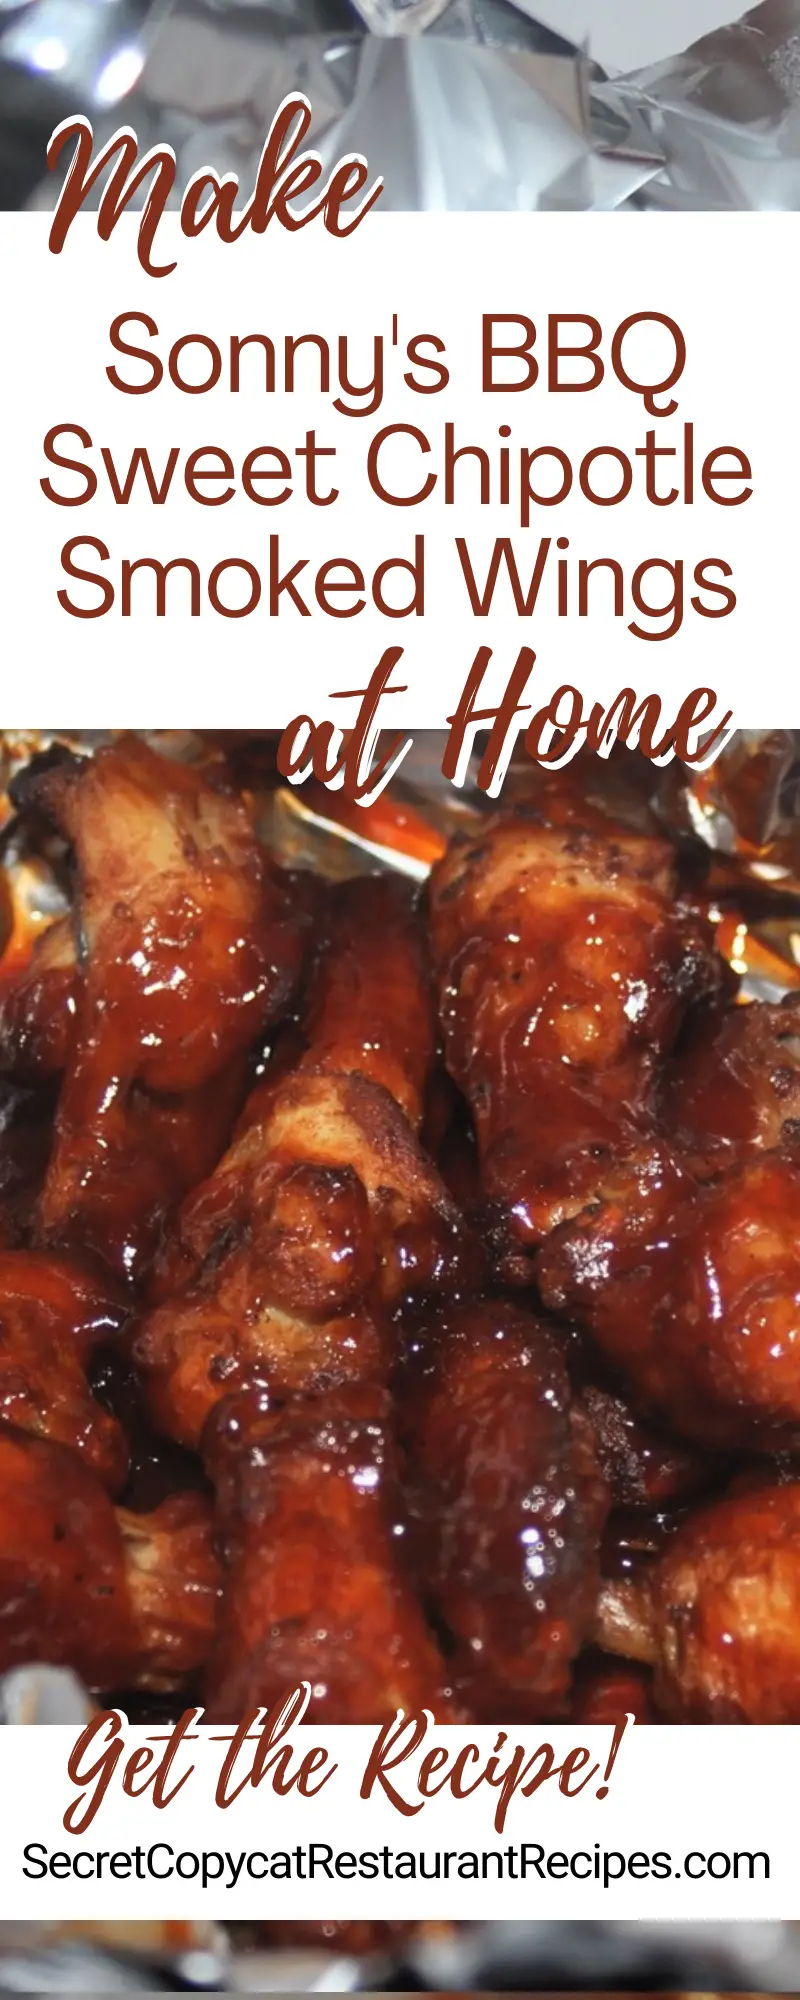 Sonny's BBQ Sweet Chipotle Smoked Wings Recipe